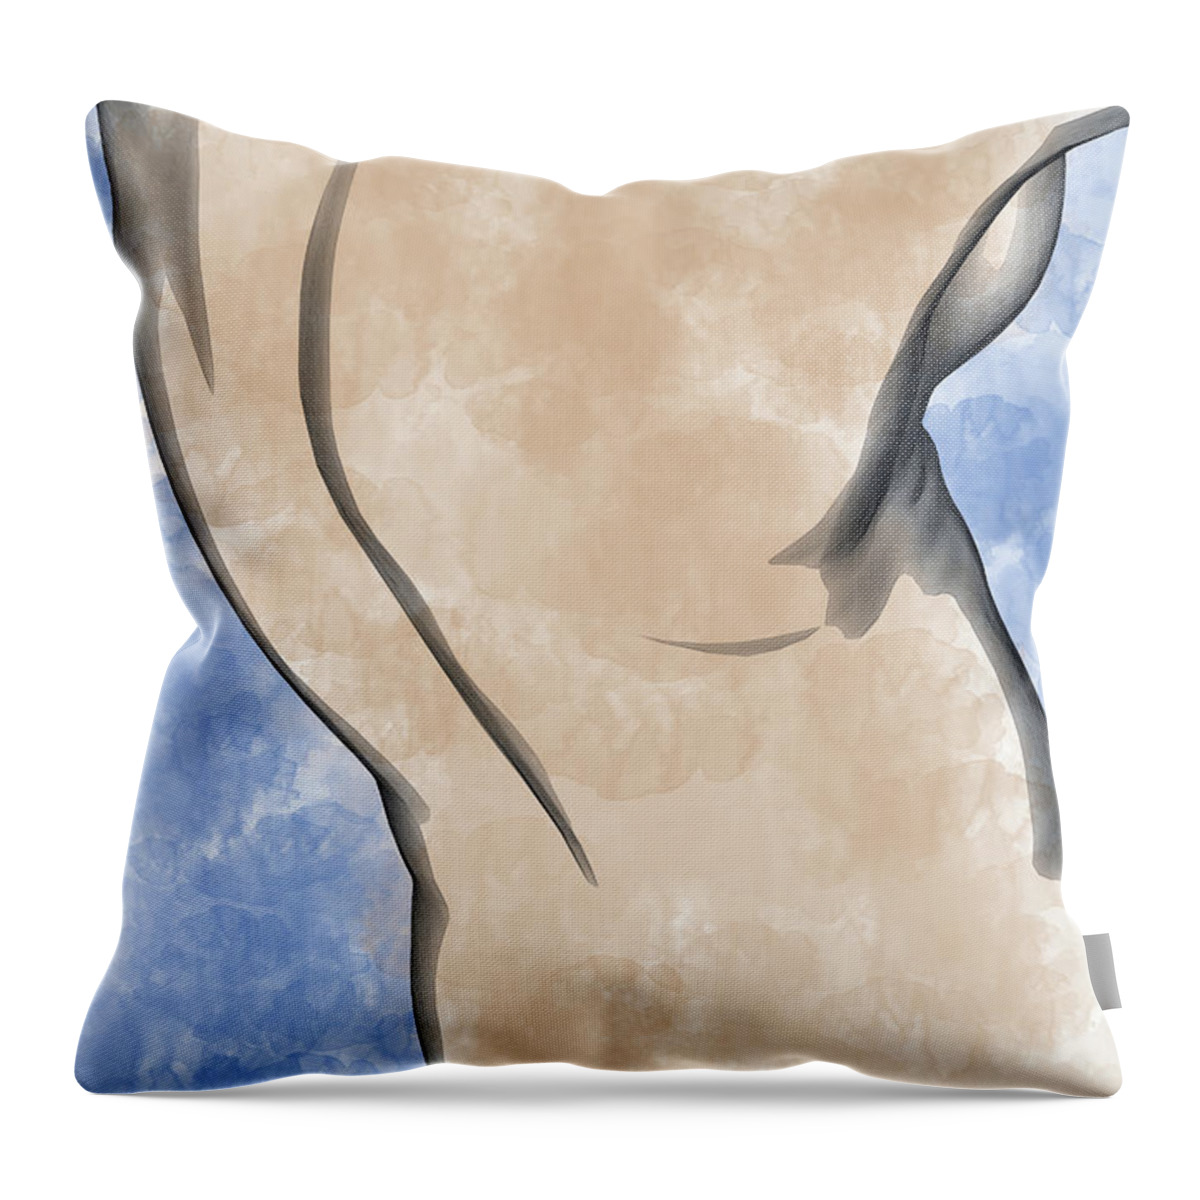 Man Throw Pillow featuring the digital art A Torso by Peter J Sucy